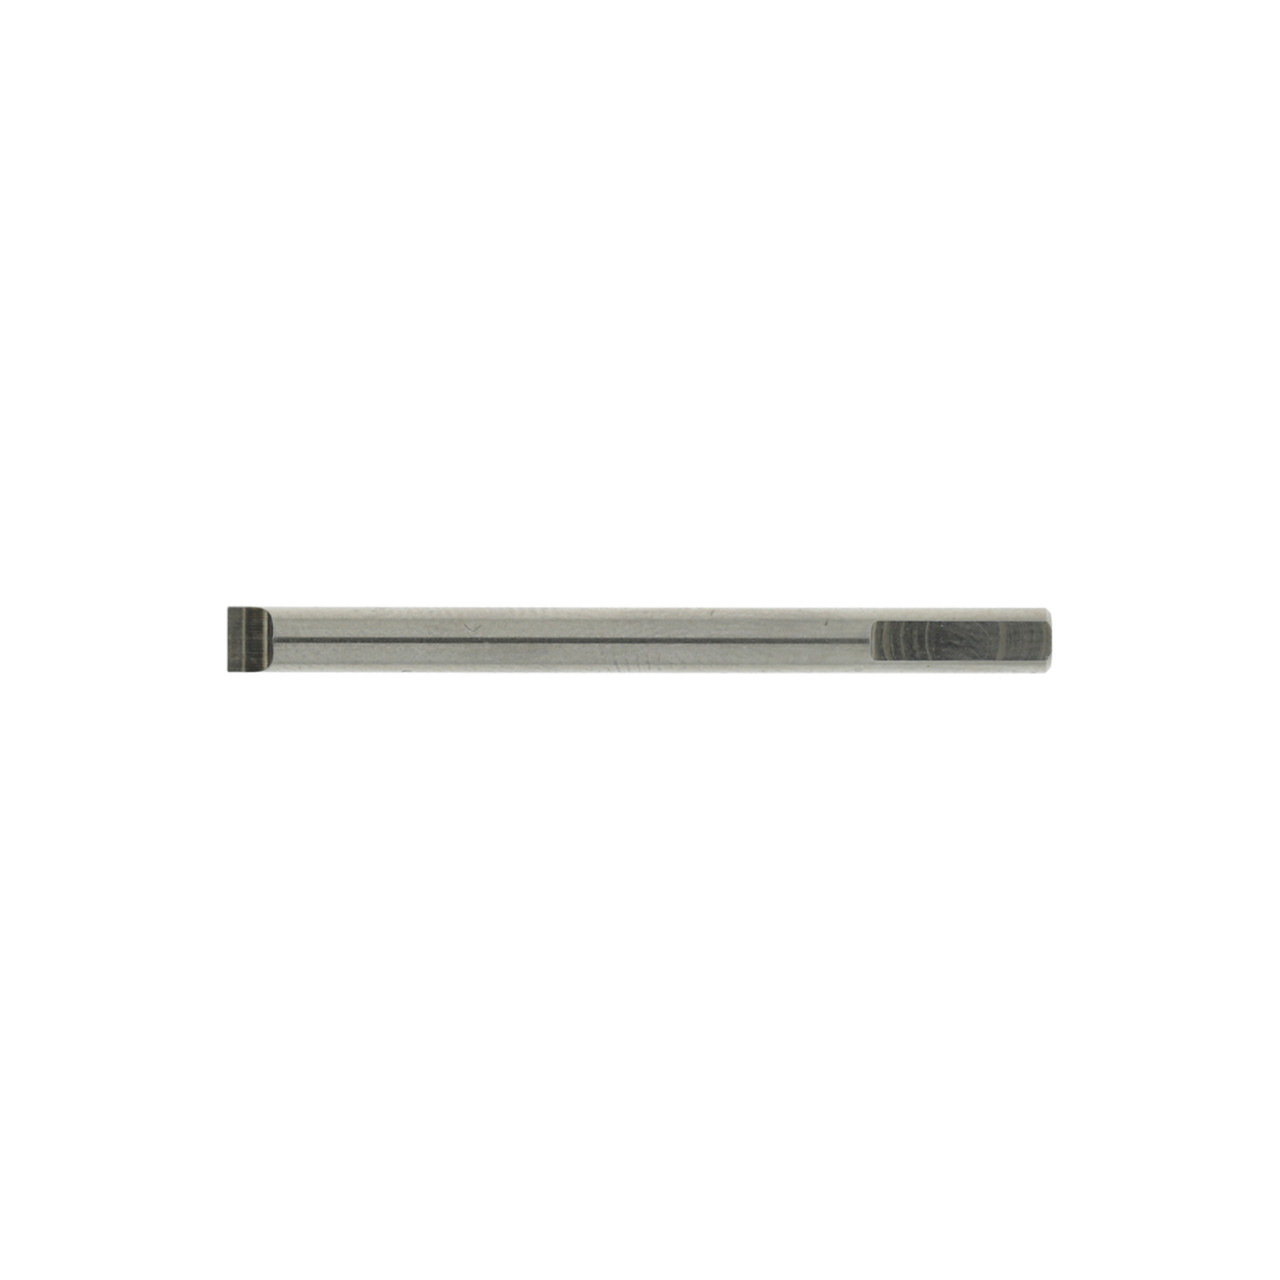 HOROTEC® Watch Screwdriver Blade Only Large Handle Part MSA01.019-250